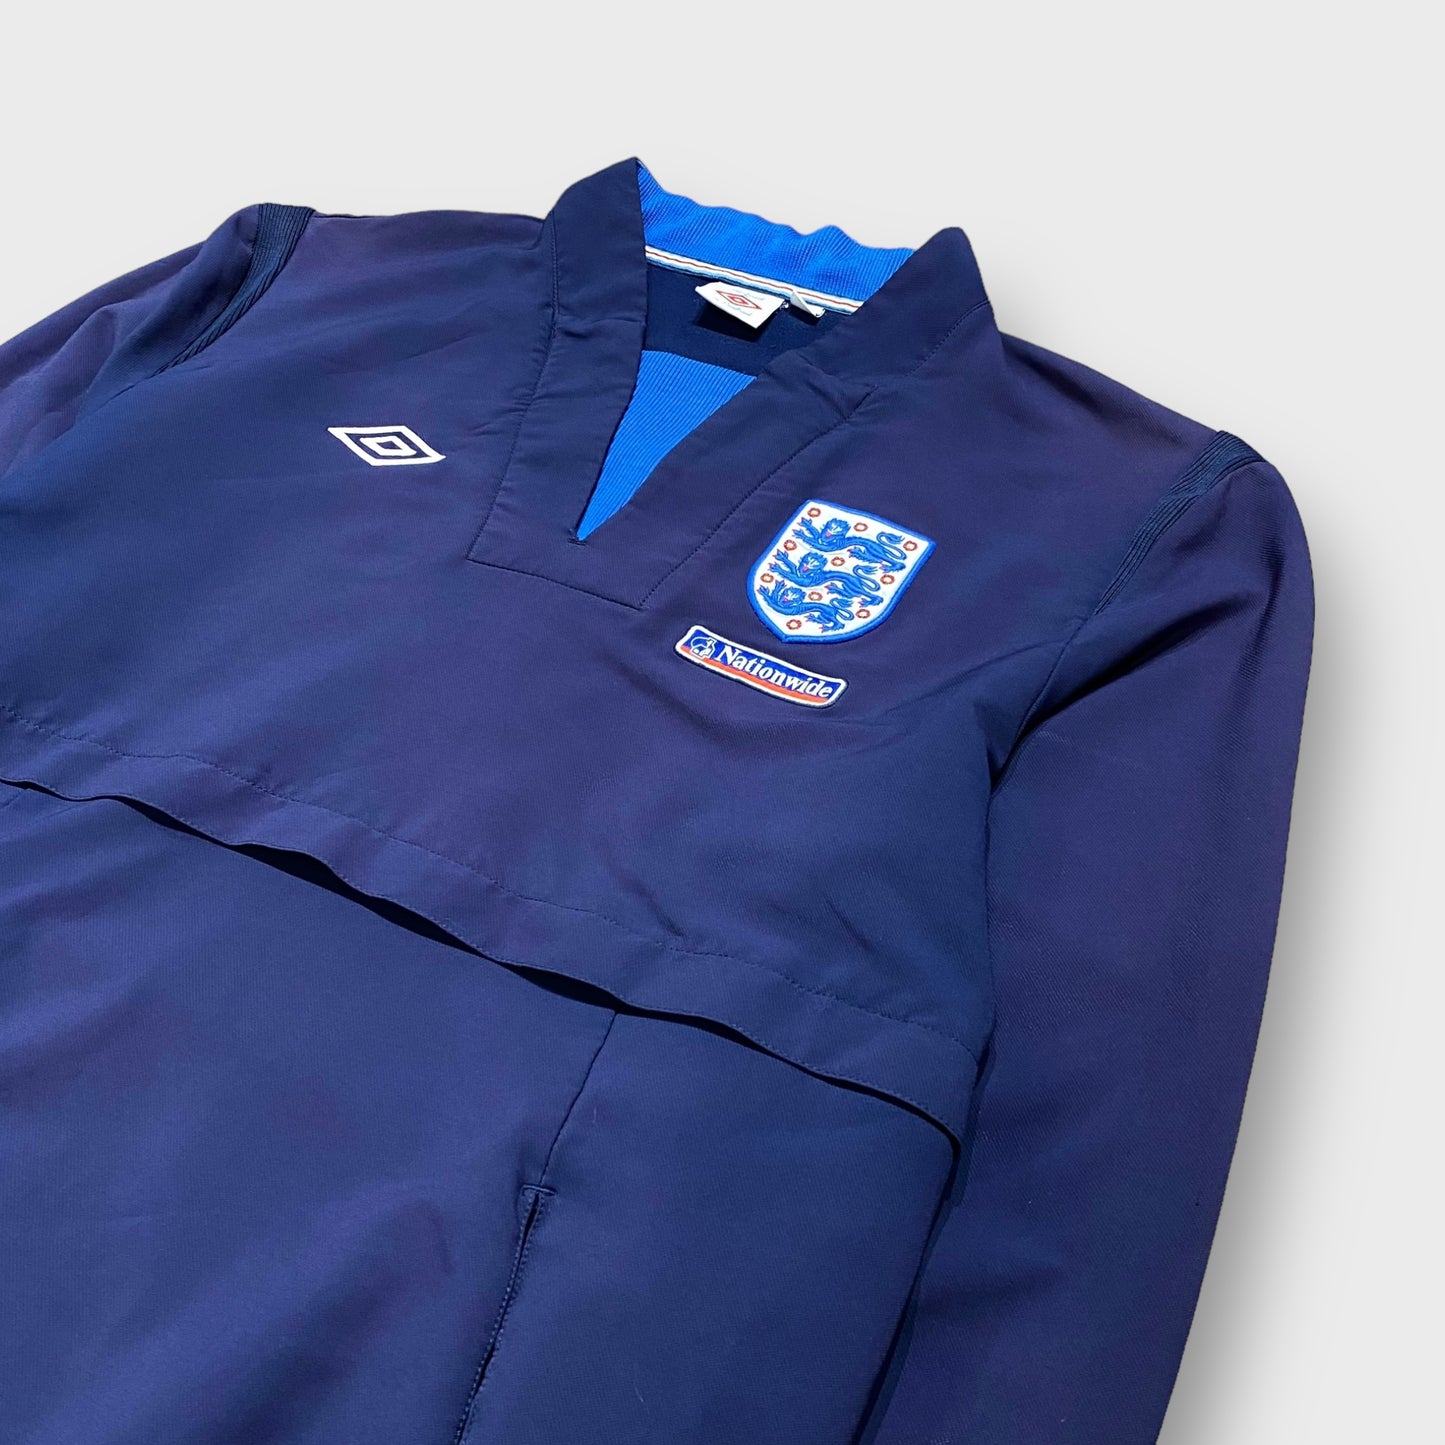 00's "umbro" England national team pullover